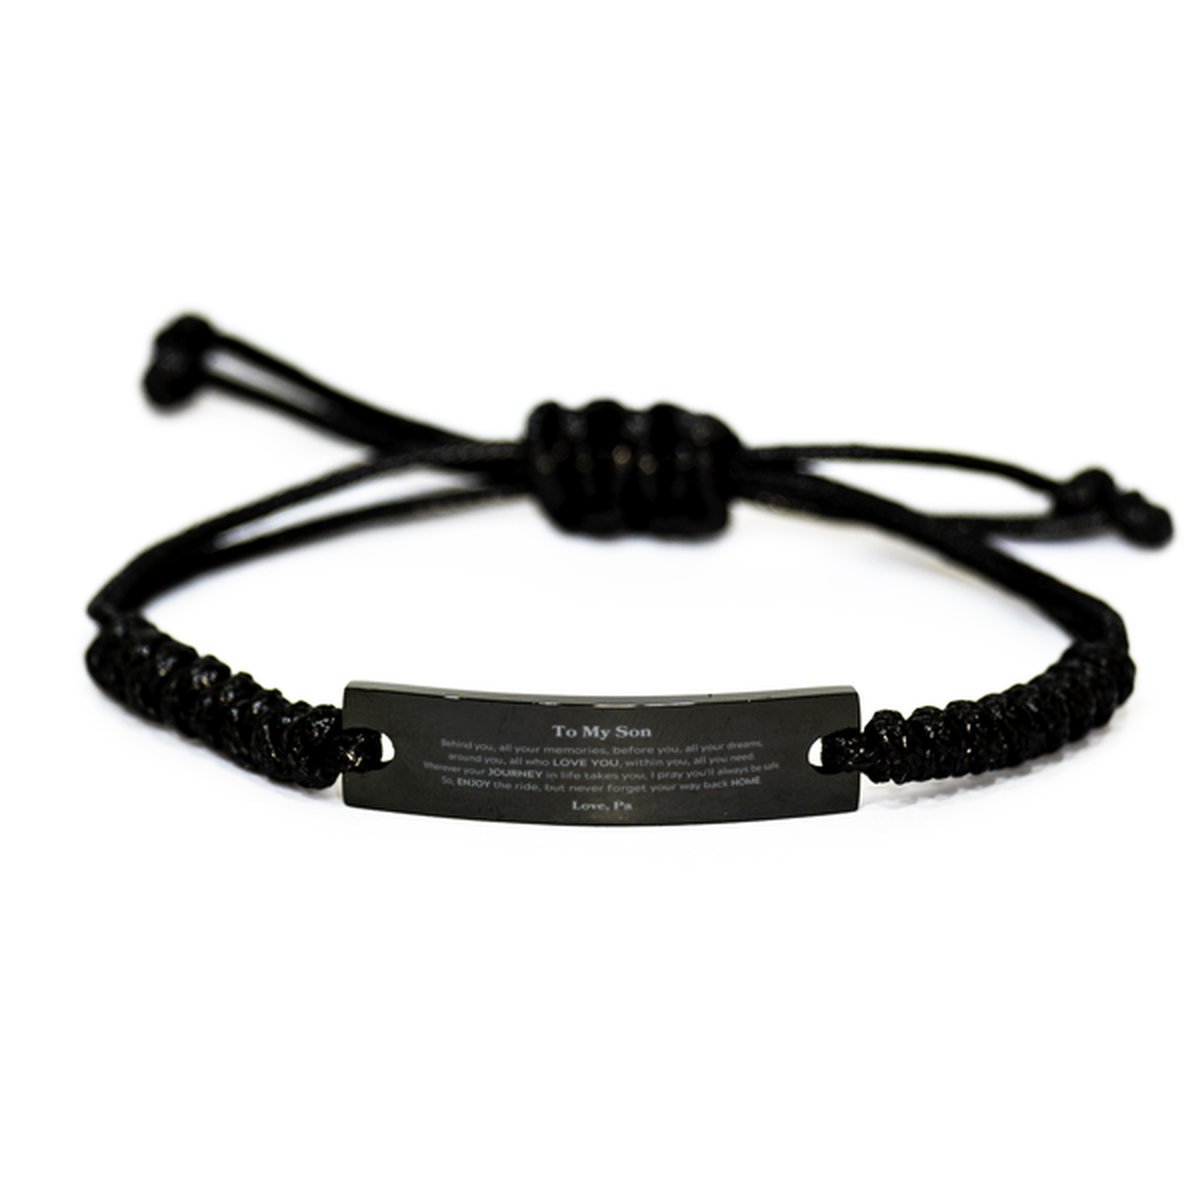 To My Son Graduation Gifts from Pa, Son Black Rope Bracelet Christmas Birthday Gifts for Son Behind you, all your memories, before you, all your dreams. Love, Pa